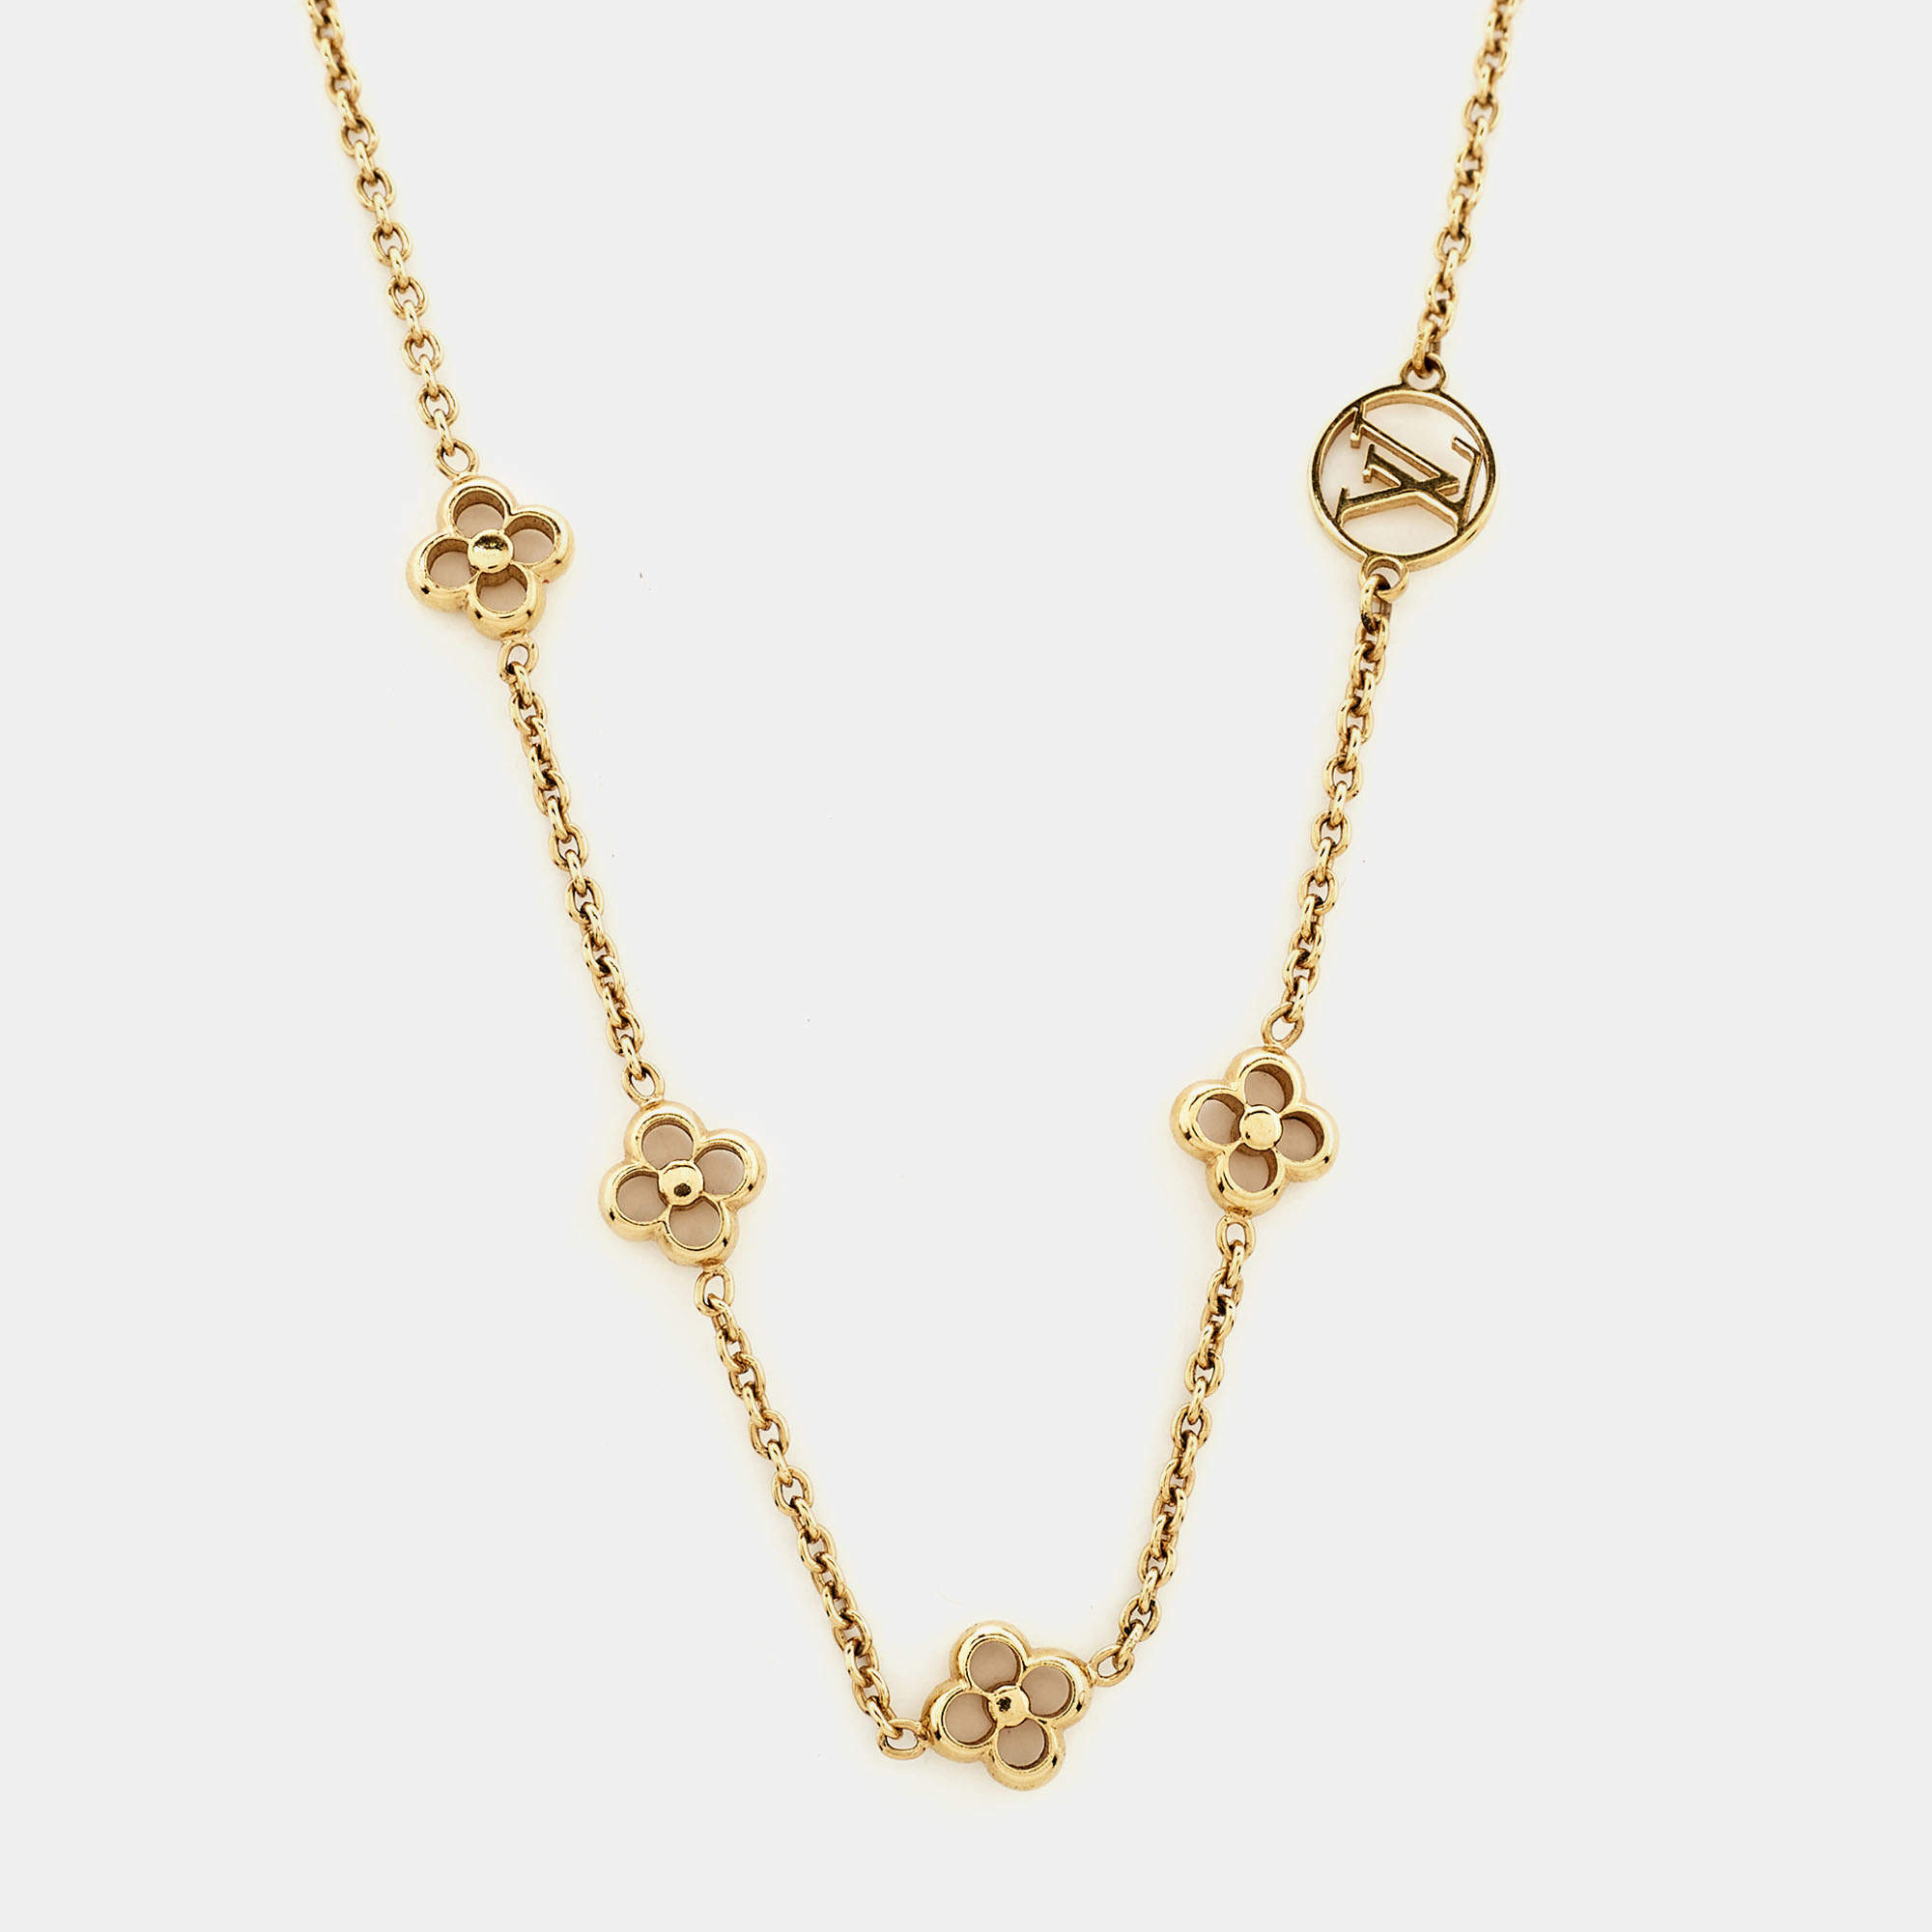 Louis Vuitton Flower Full Station Necklace - Brass Station